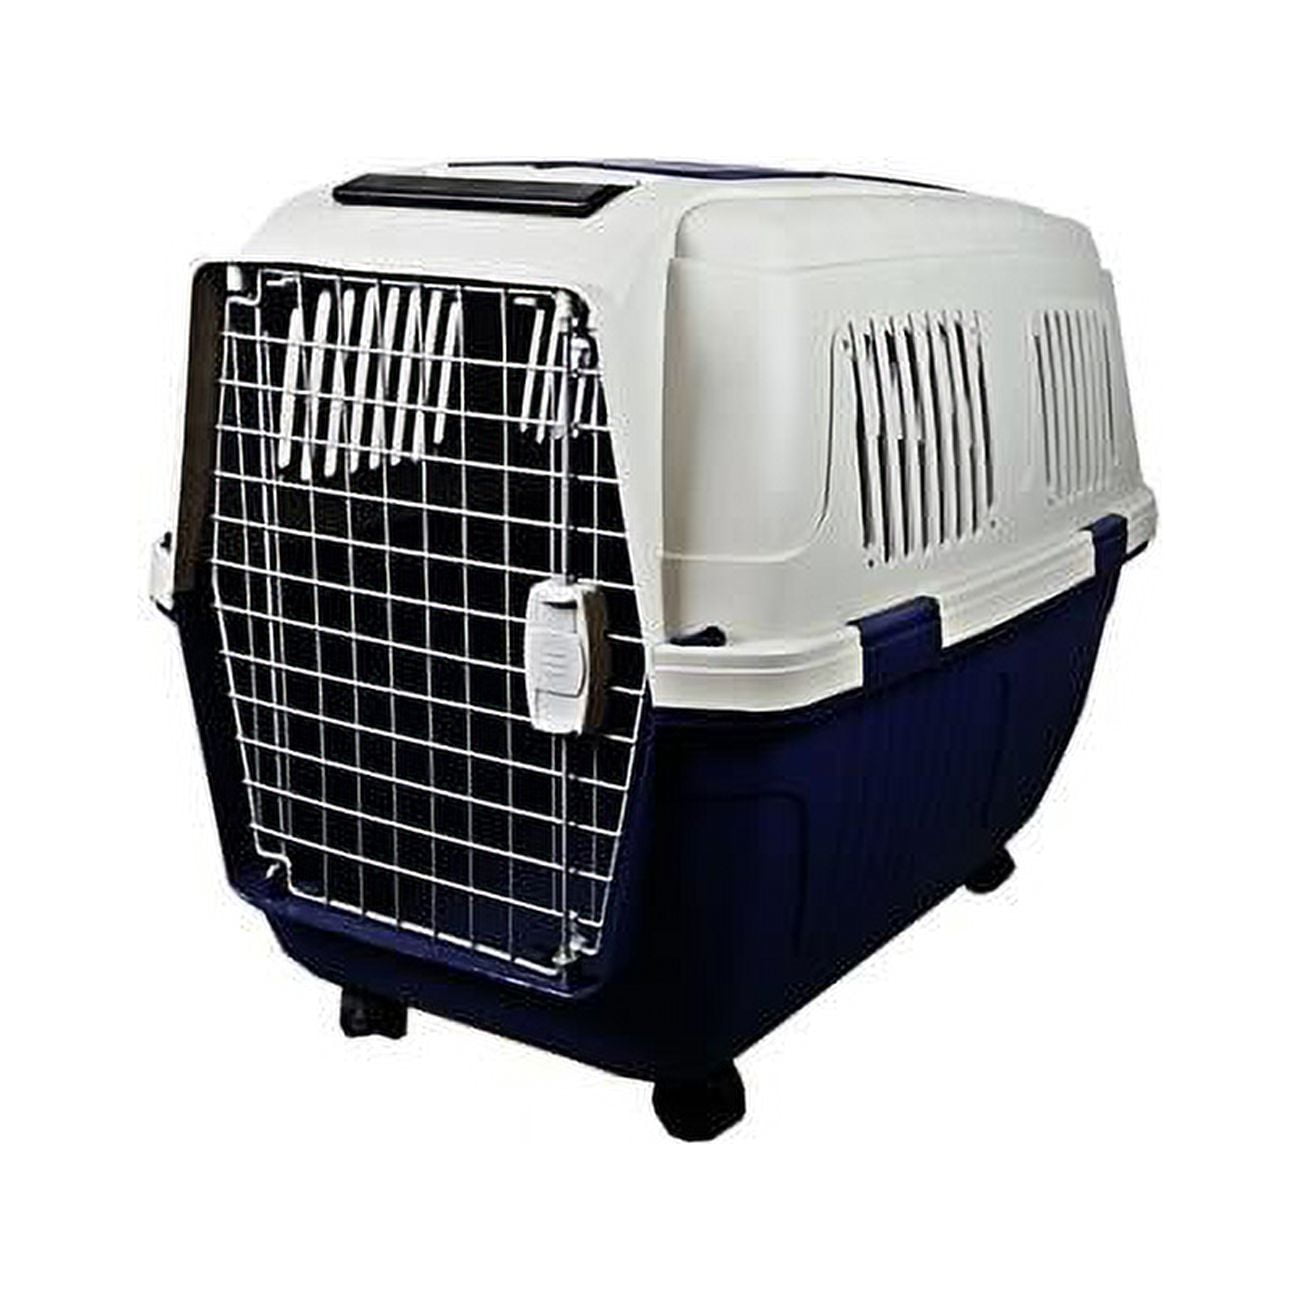 Cd5 Assorted 28 X 21 X 20 In. Deluxe Pet Carriers, Assorted Color